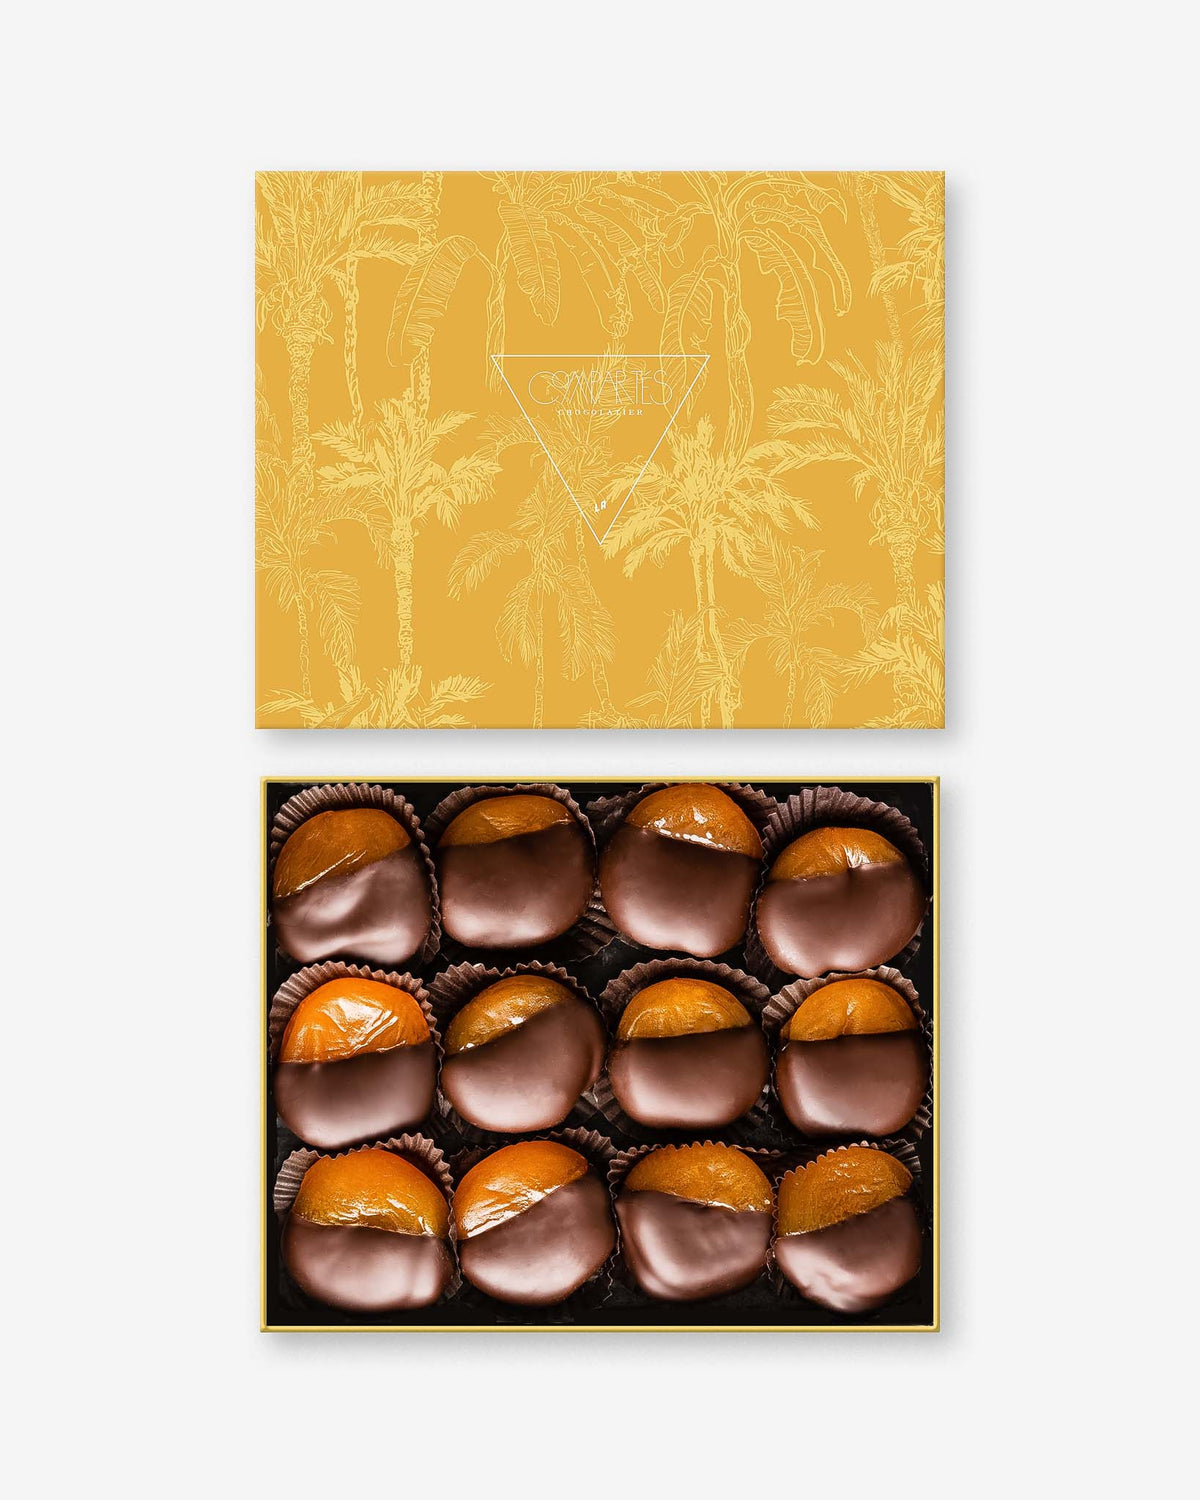 Fine Chocolate Gift Box - Luxury Chocolate Covered Fruit Apricots - made in Los Angeles